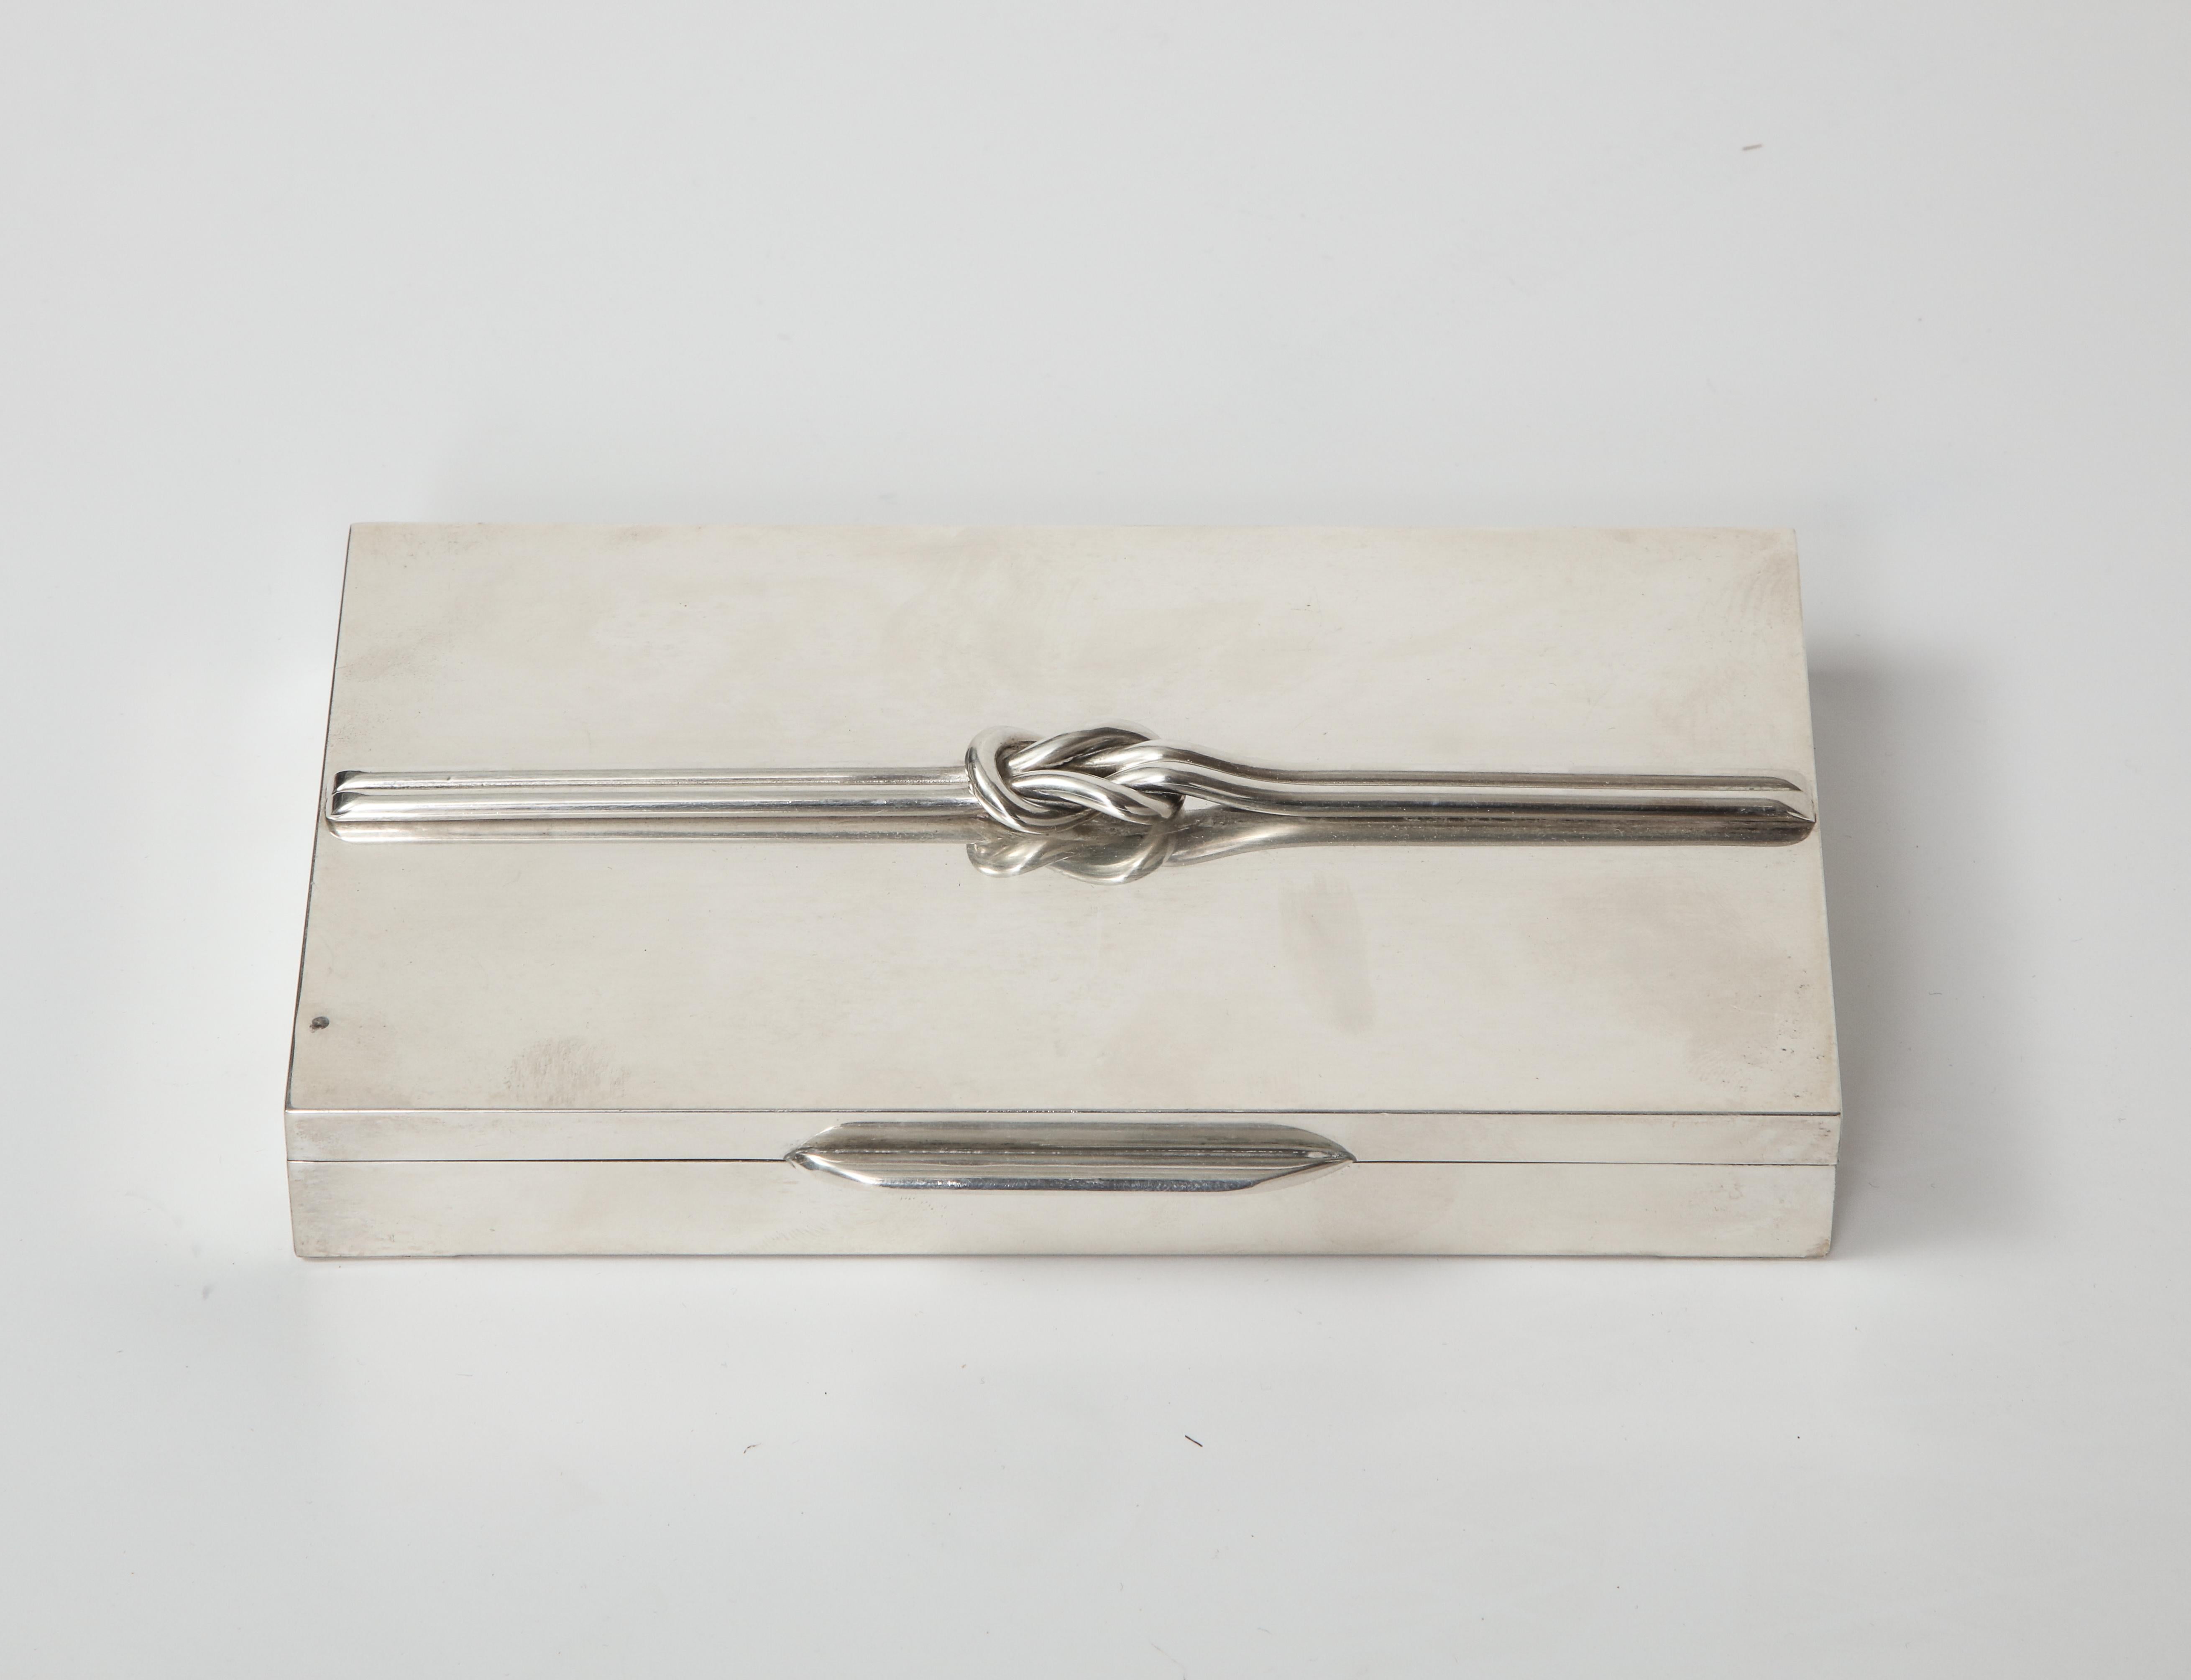 1950s French sterling silver box with knot detail and hallmark on bottom frame.